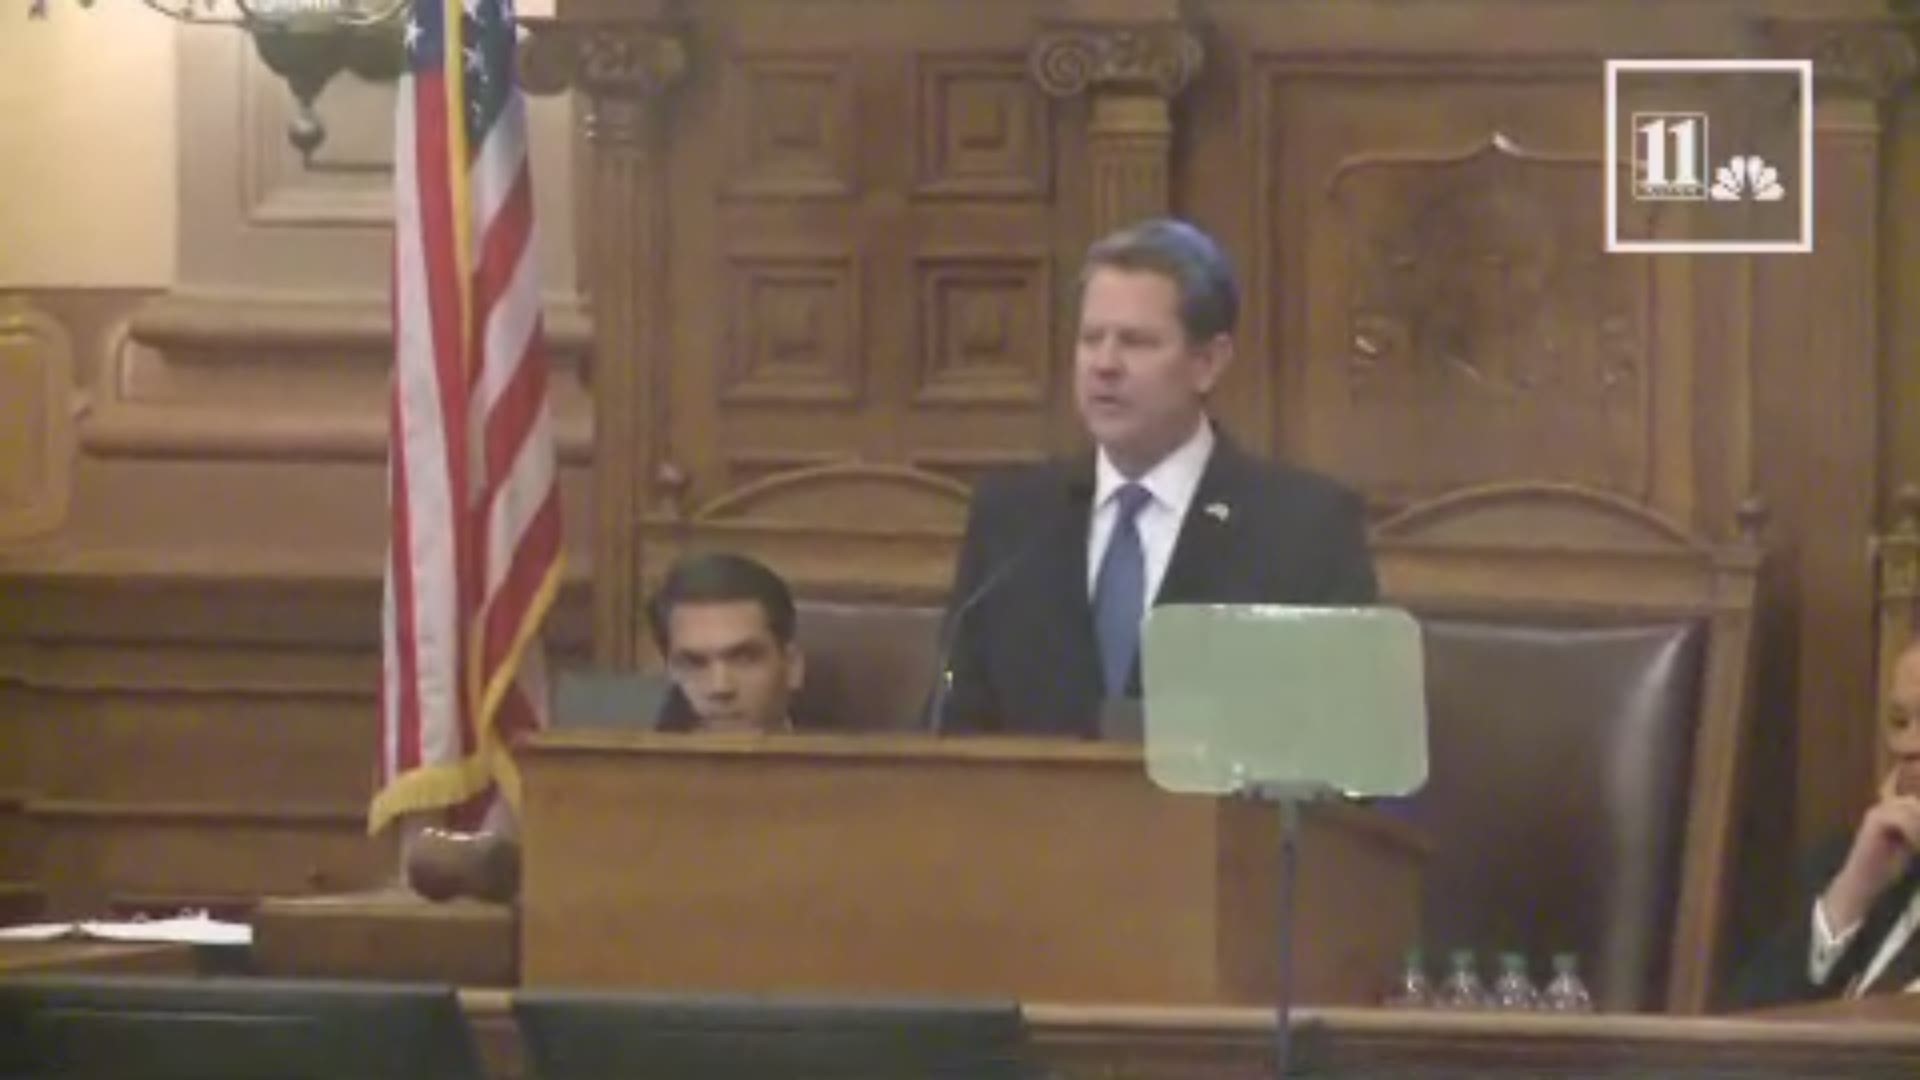 Gov. Brian Kemp addressed teacher pay raises and crime during his first State of the State Address before a joint session of the House and Senate.